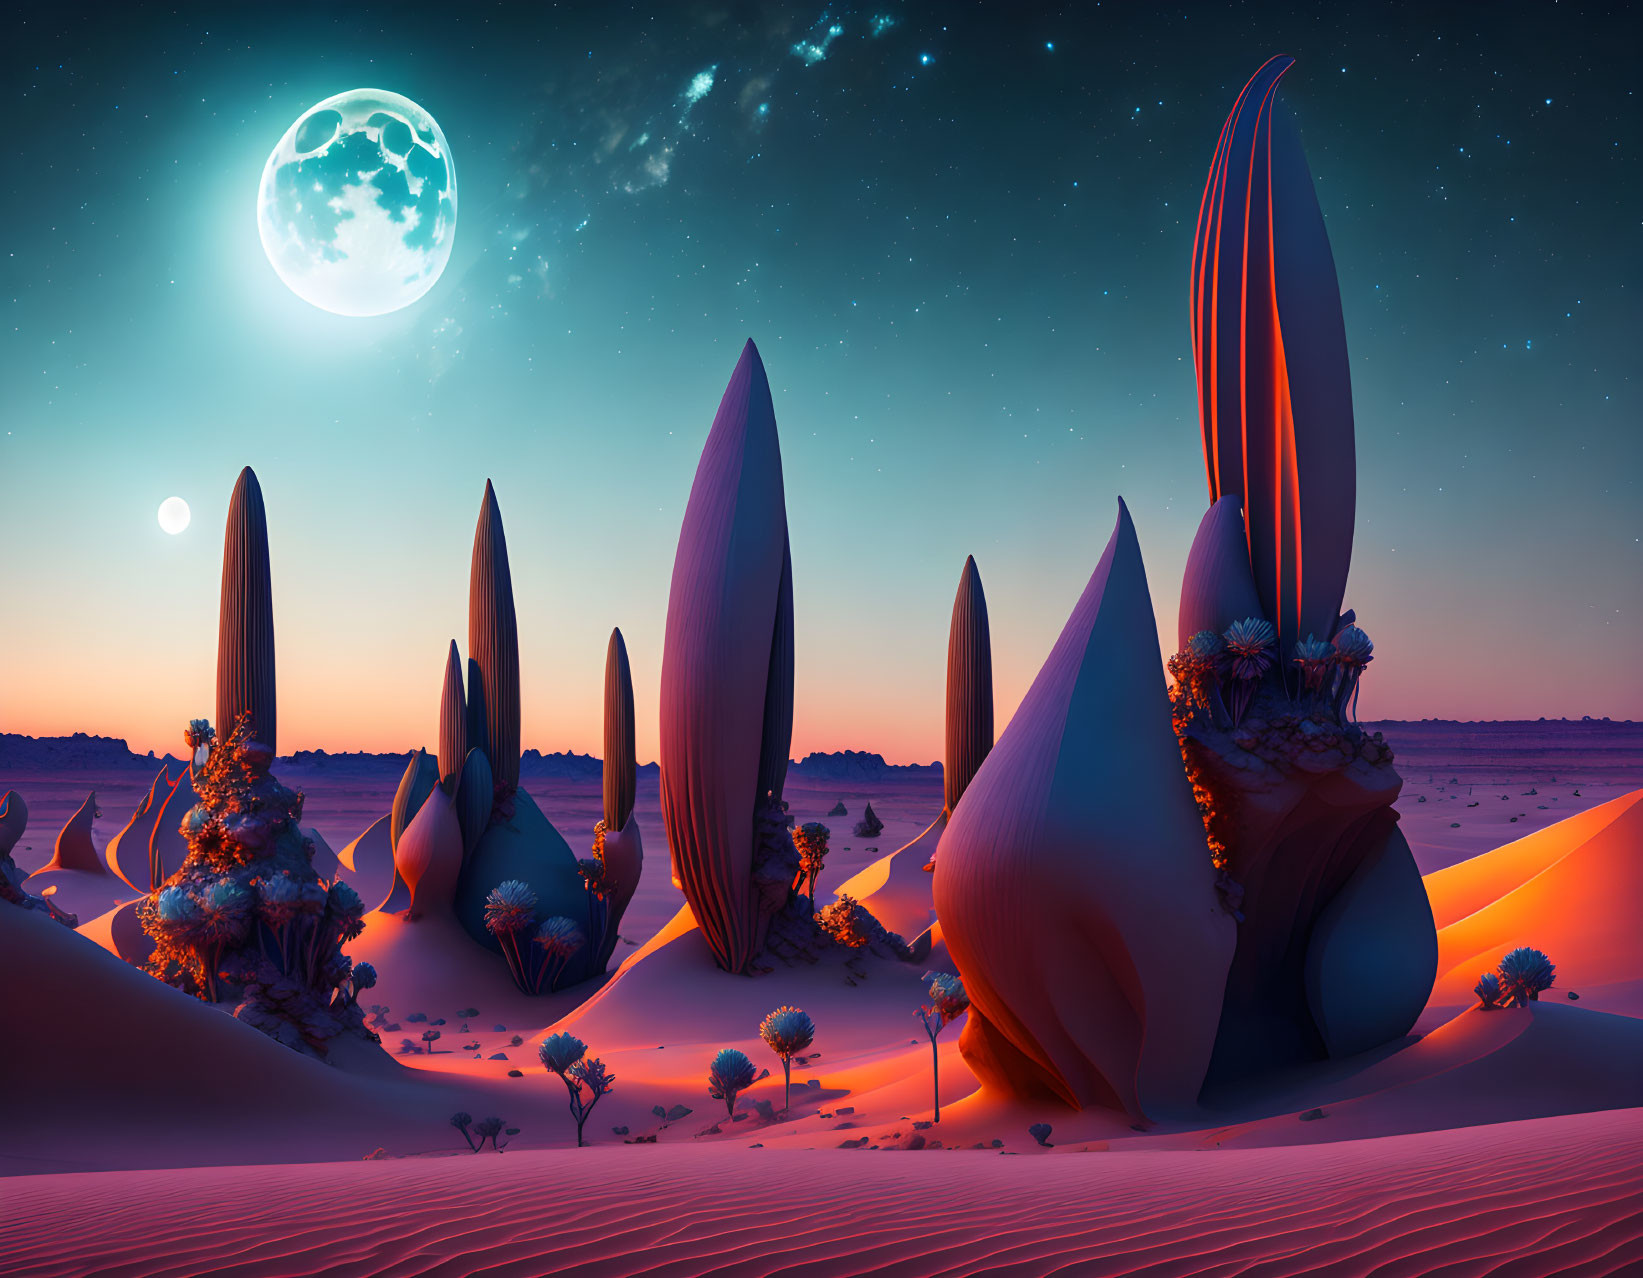 Surreal desert landscape with futuristic plant-like structures at twilight